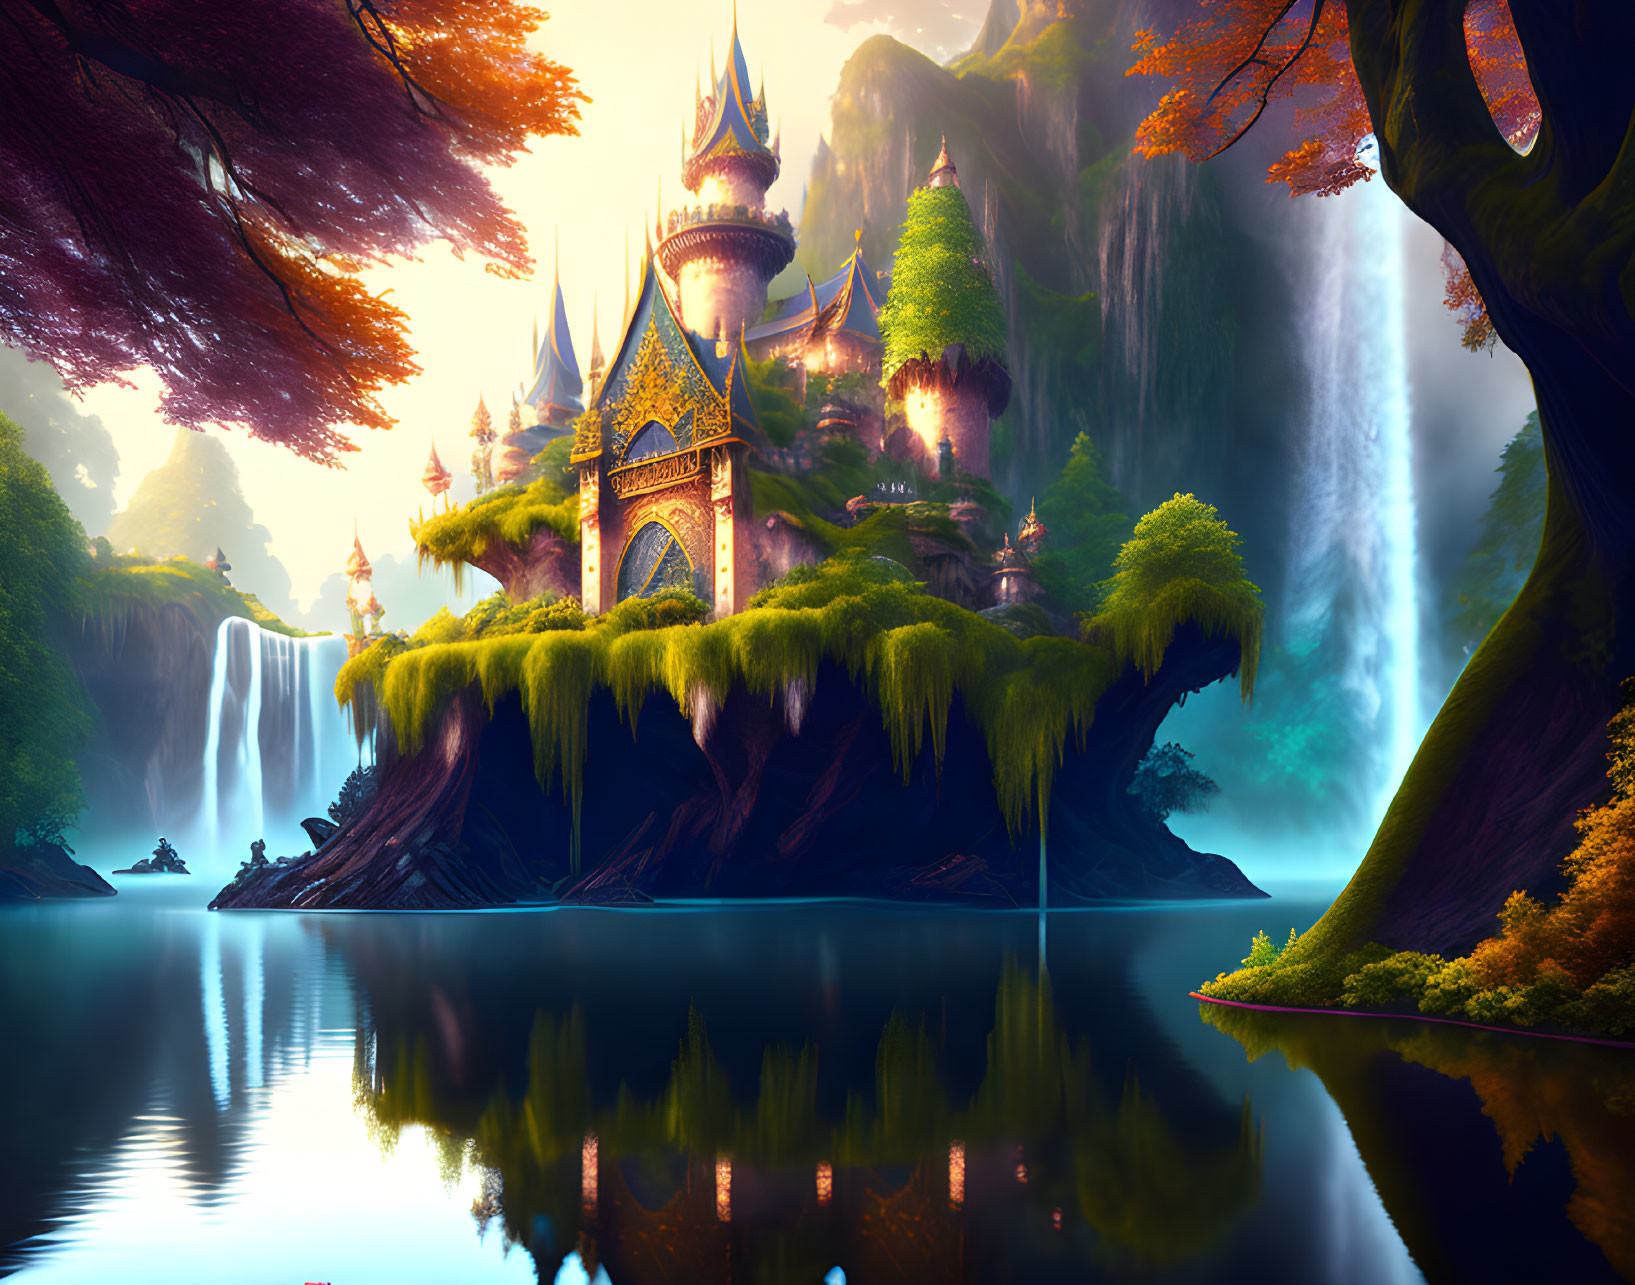 Majestic castle surrounded by lush forests and waterfalls